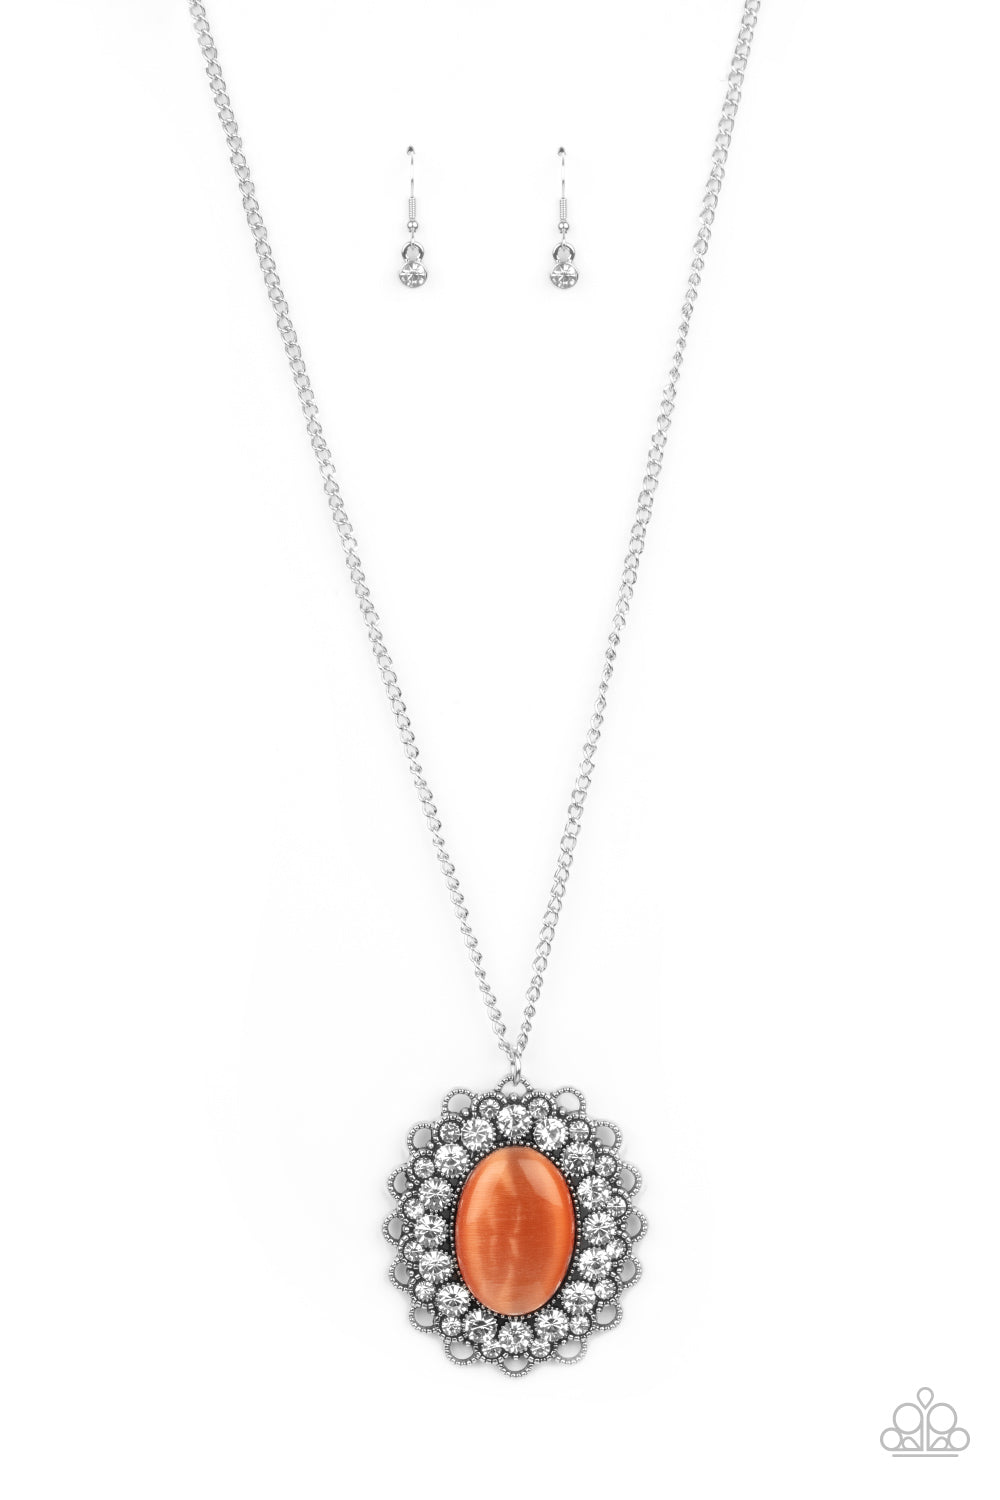 Oh My Medallion - Orange ***COMING SOON*** - Bling With Crystal